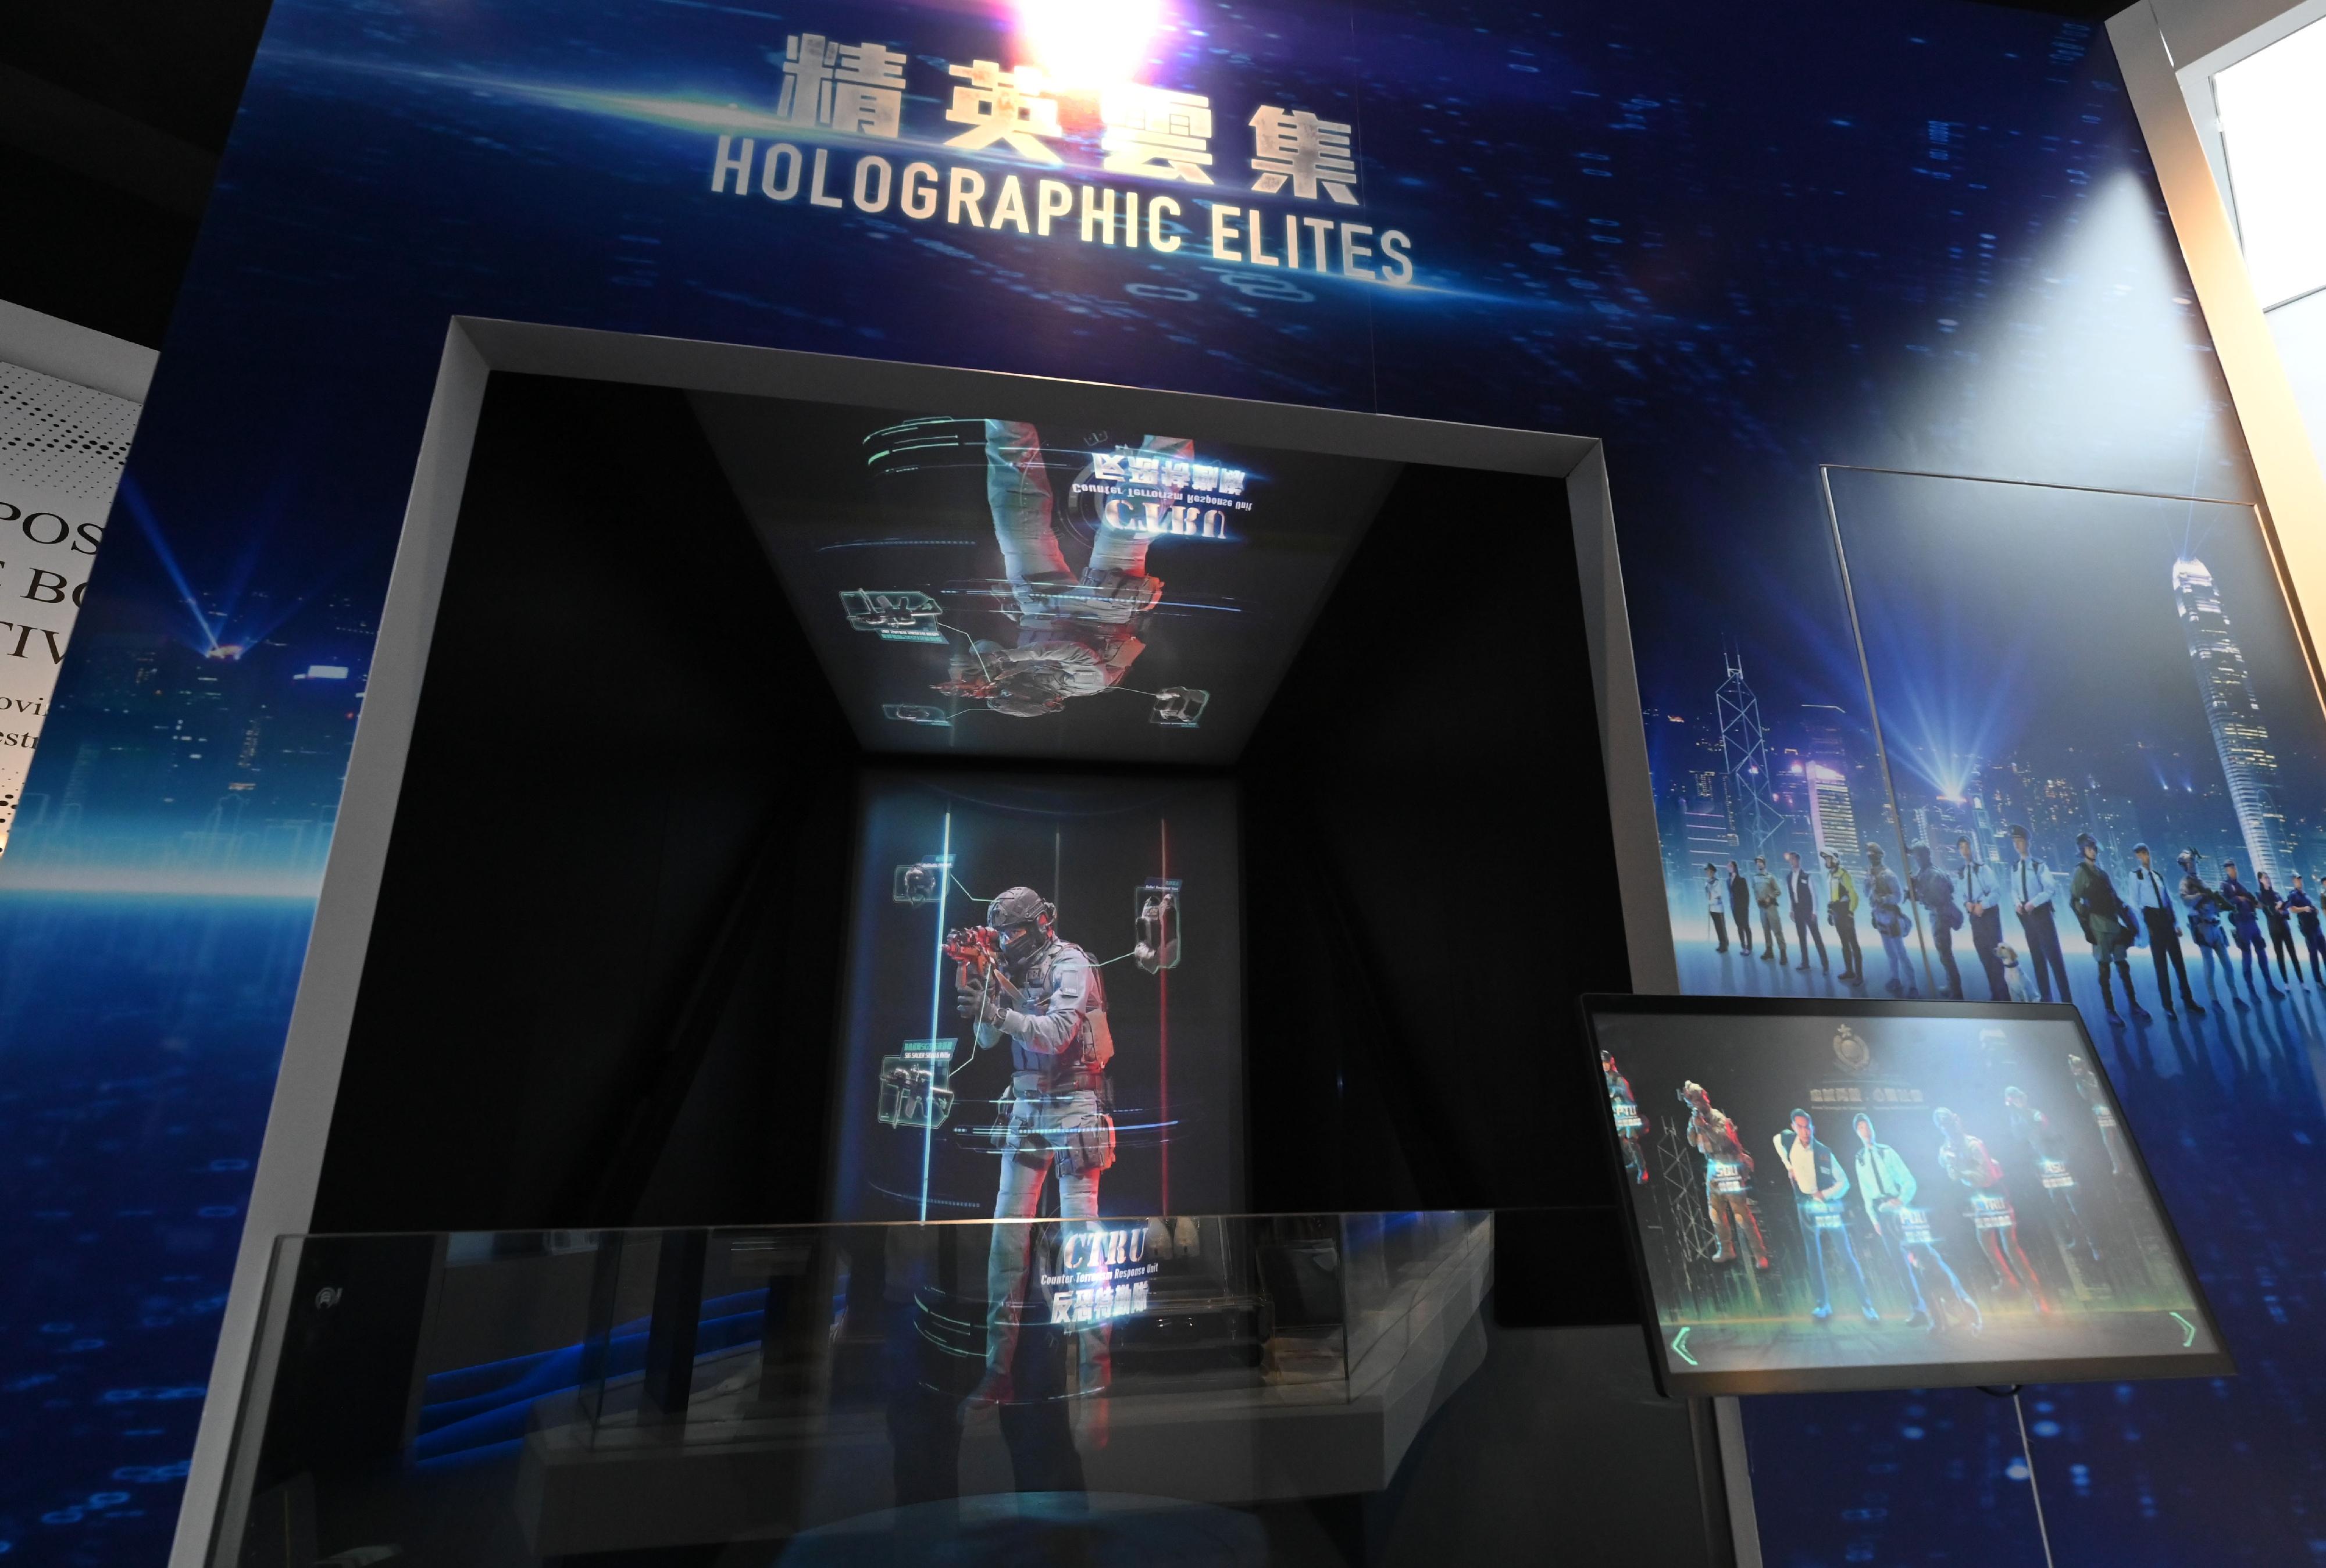 The Reopening Ceremony of Police Museum was held today (September 9). Photo shows the “Holographic Elites” exhibition presenting different units of Force members with the use of a hologram technology.